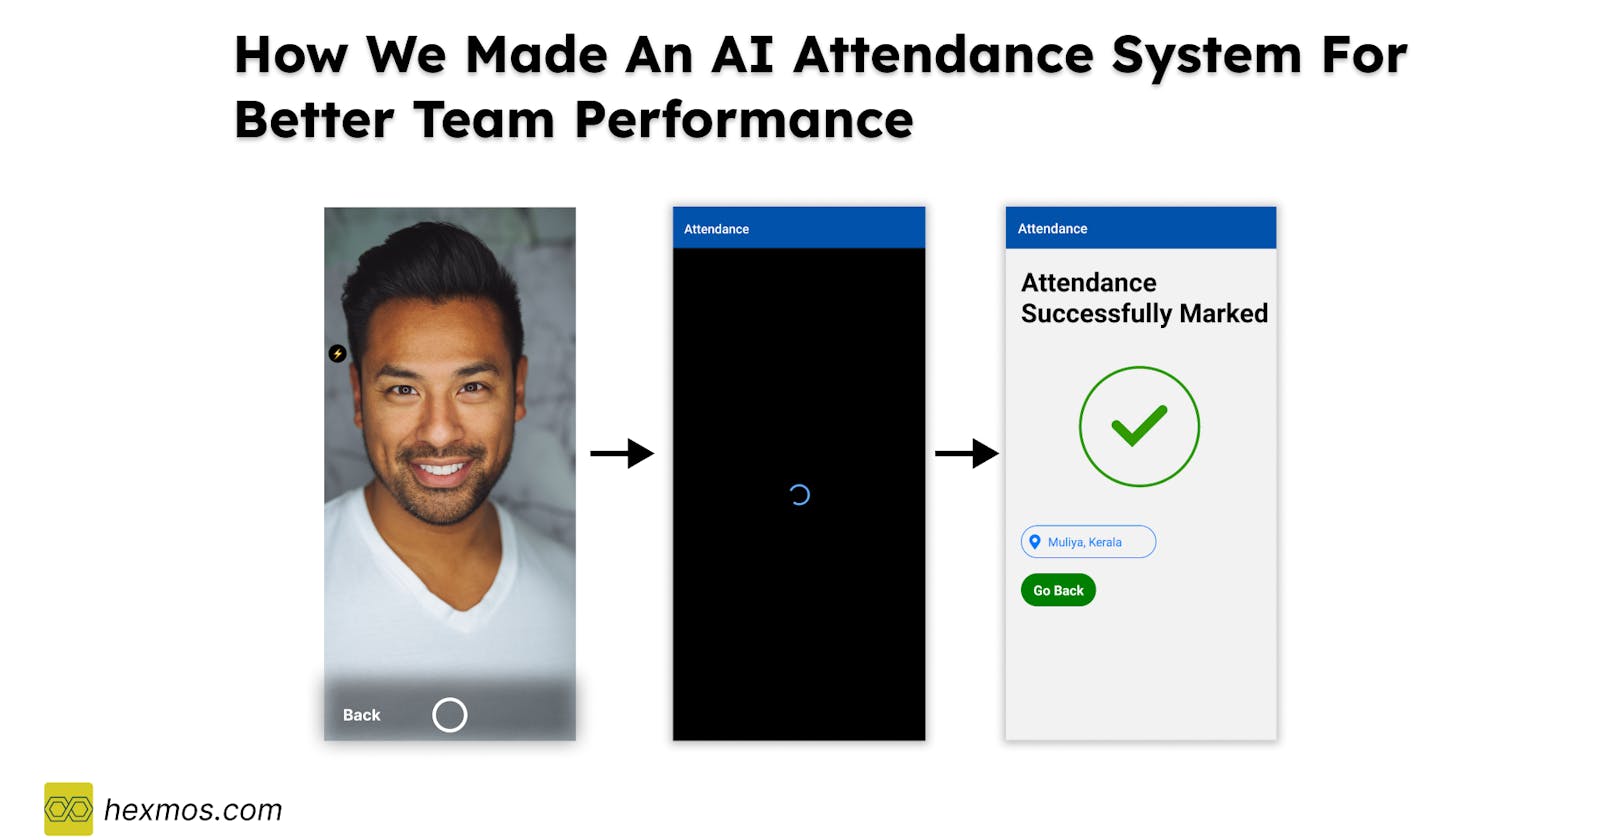 How we made an AI Attendance System for better Team Performance